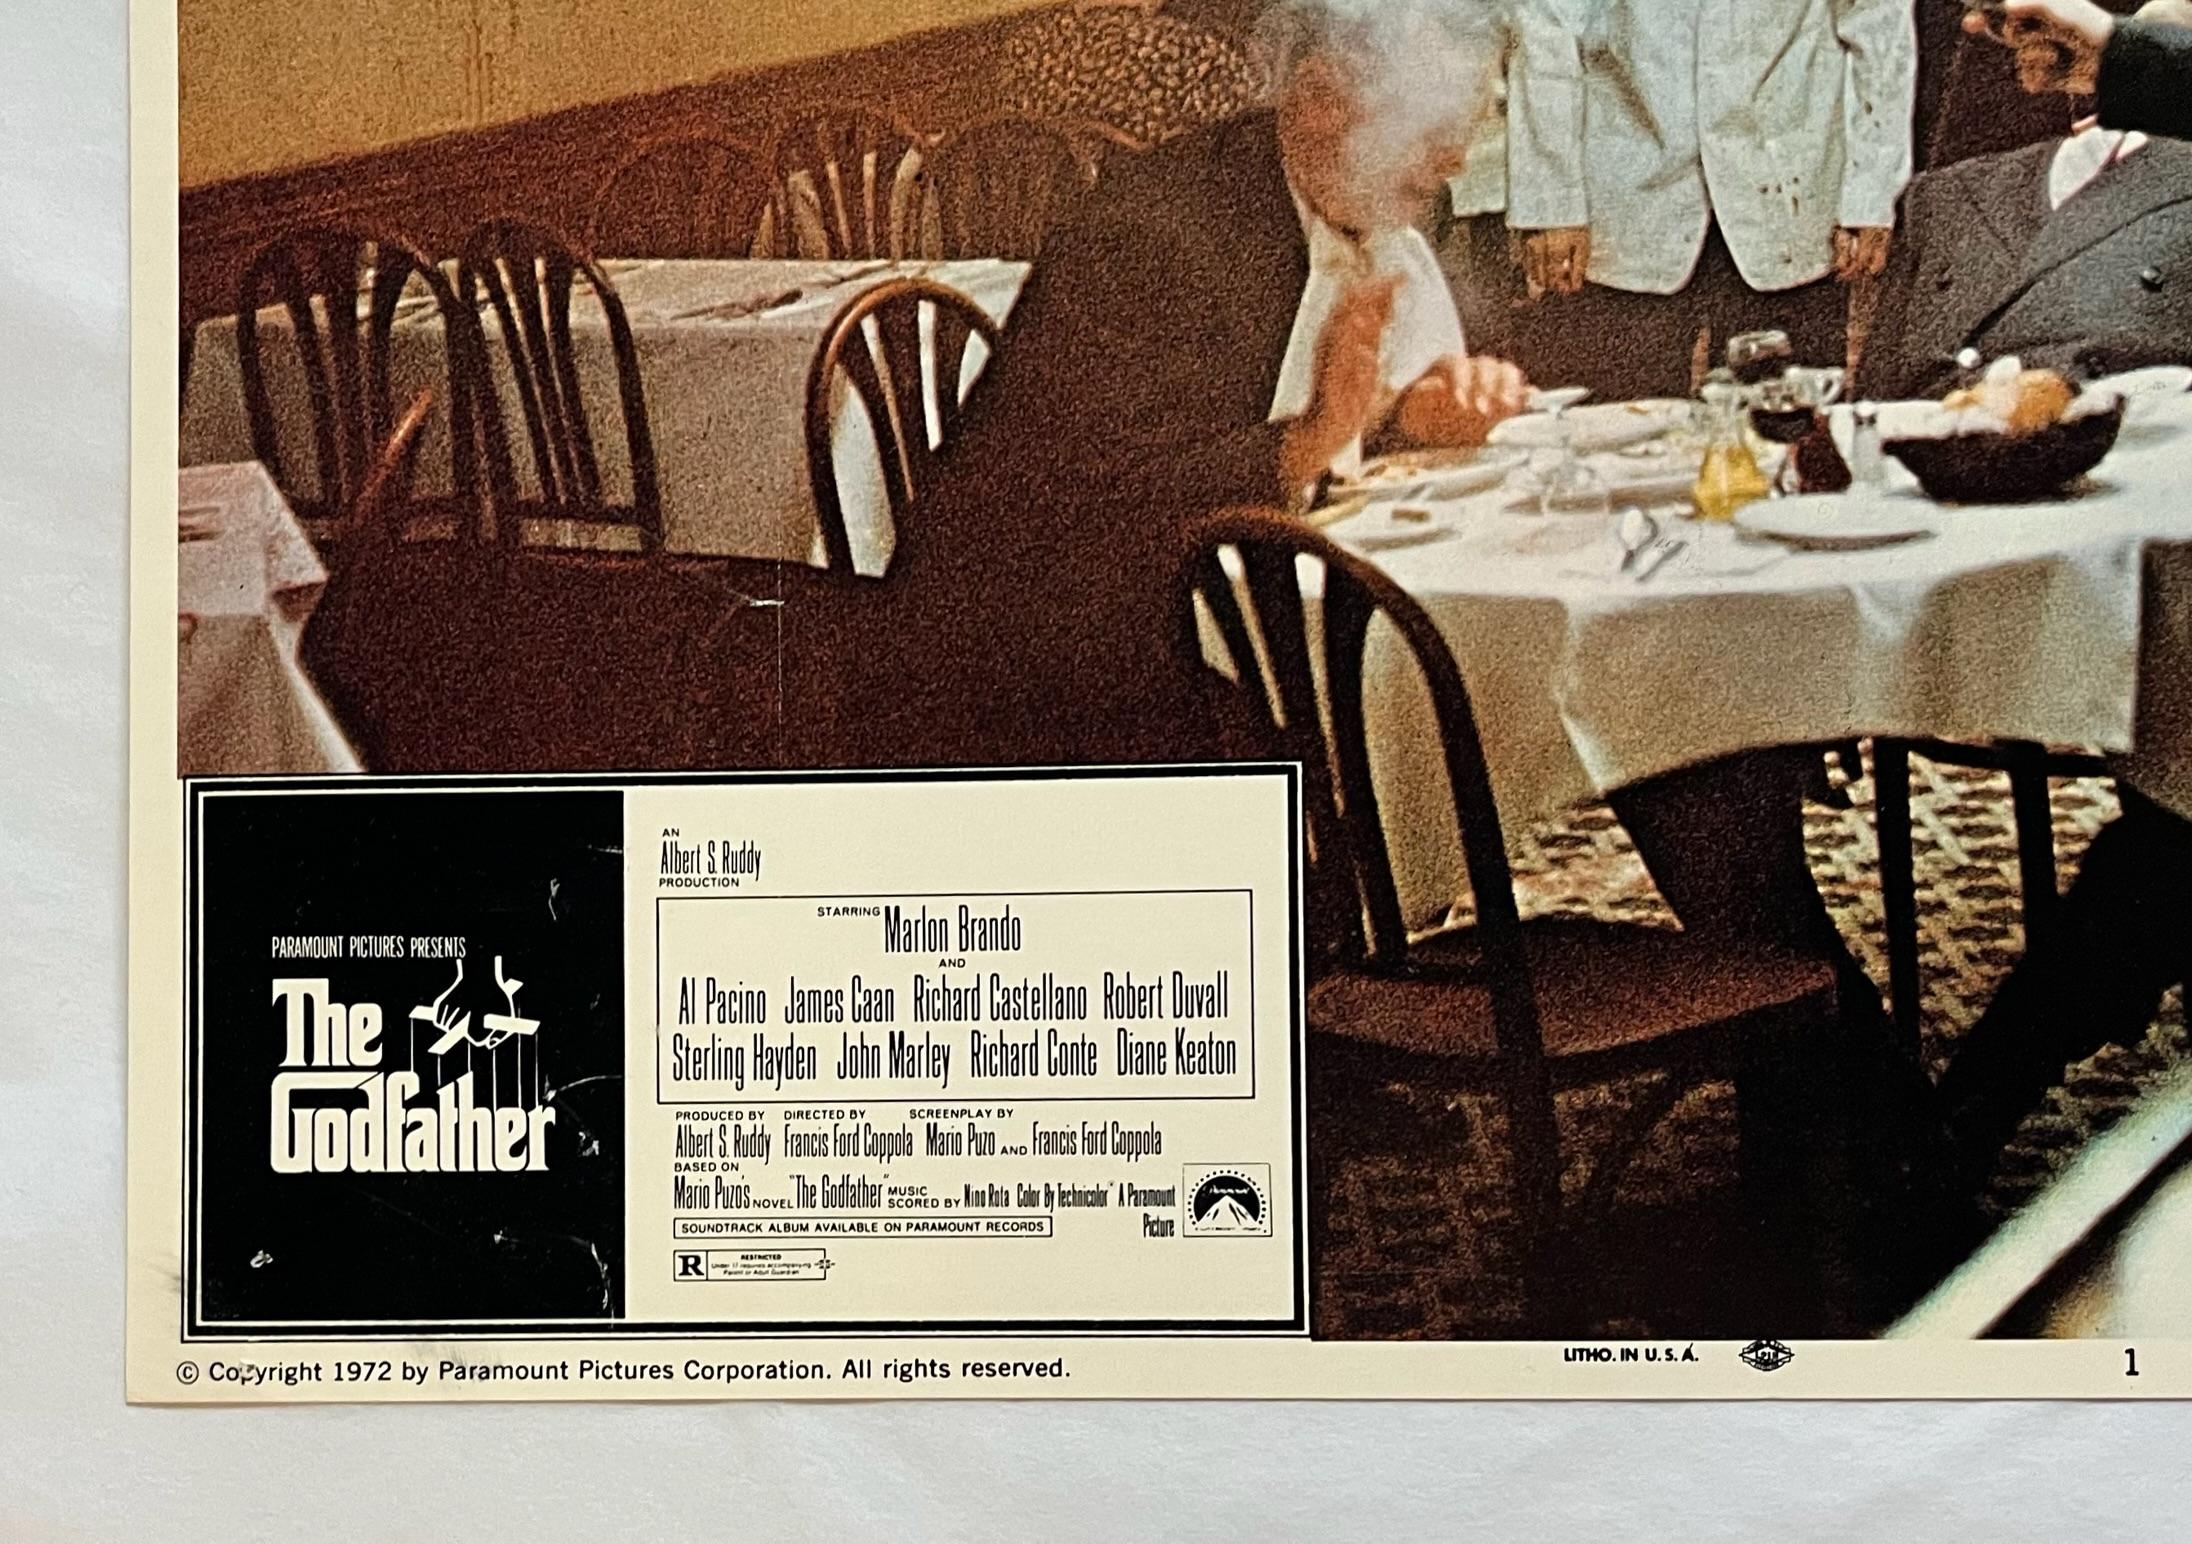 The Godfather - Original 1972 Lobby Card #1 - Print by Unknown